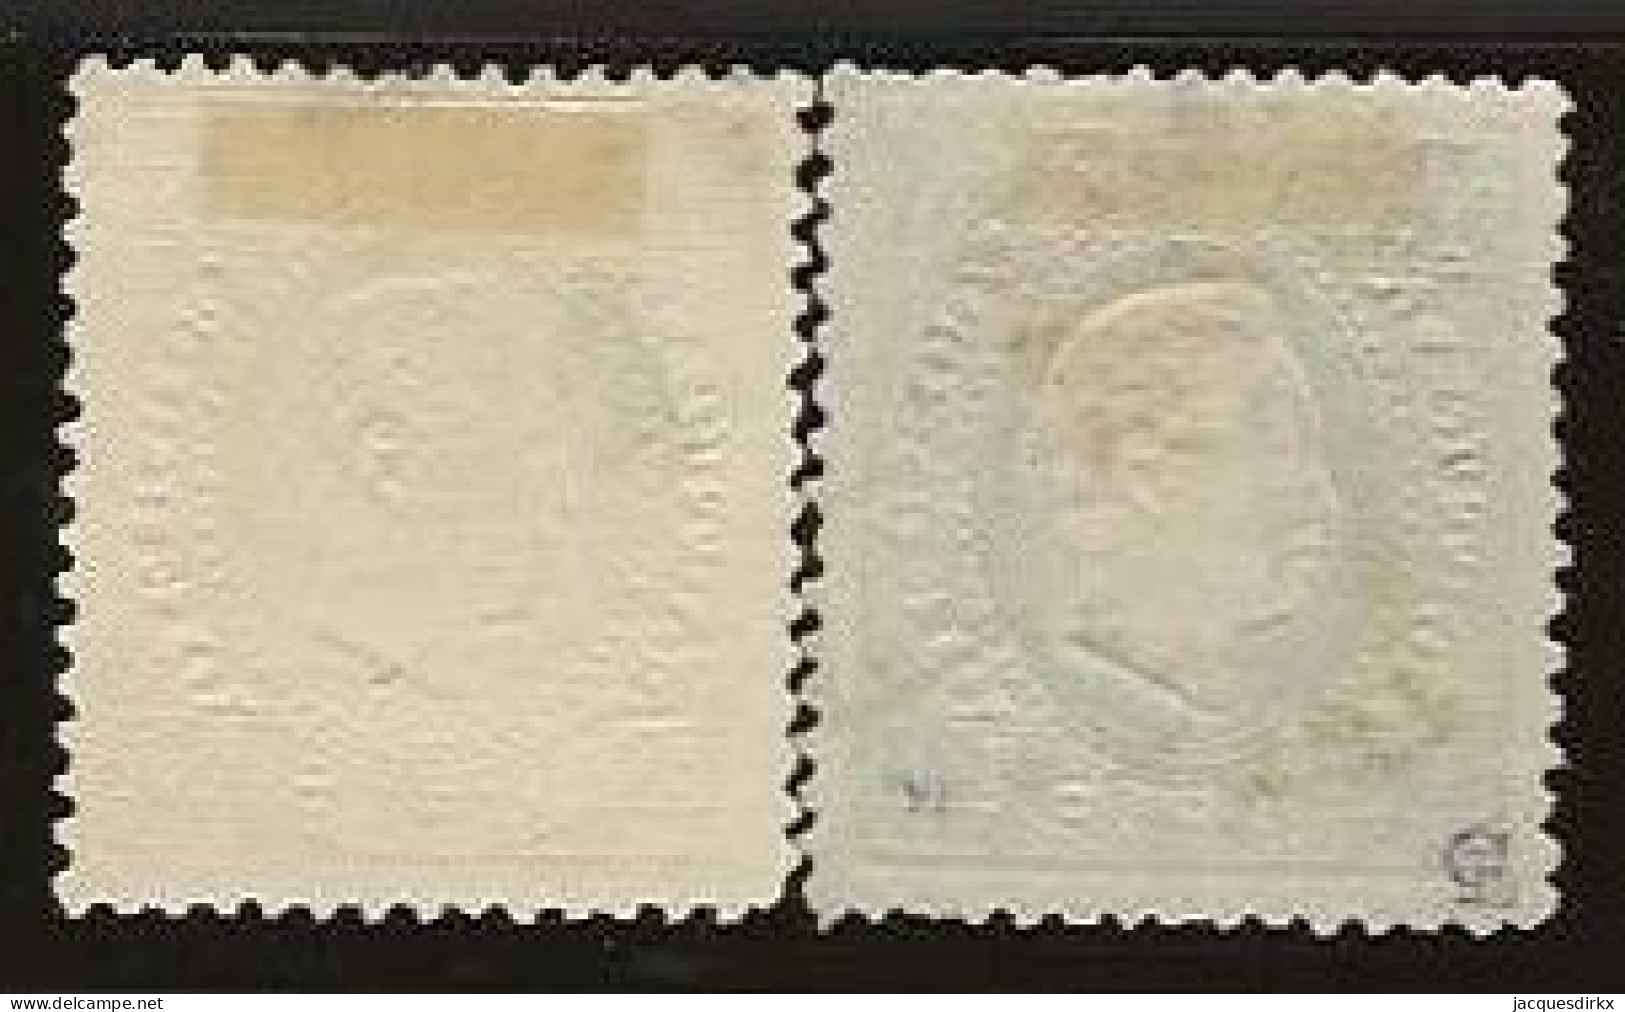 Portugal     .  Y&T      .   37/37A   (2 Scans)         .   O      .     Cancelled - Used Stamps